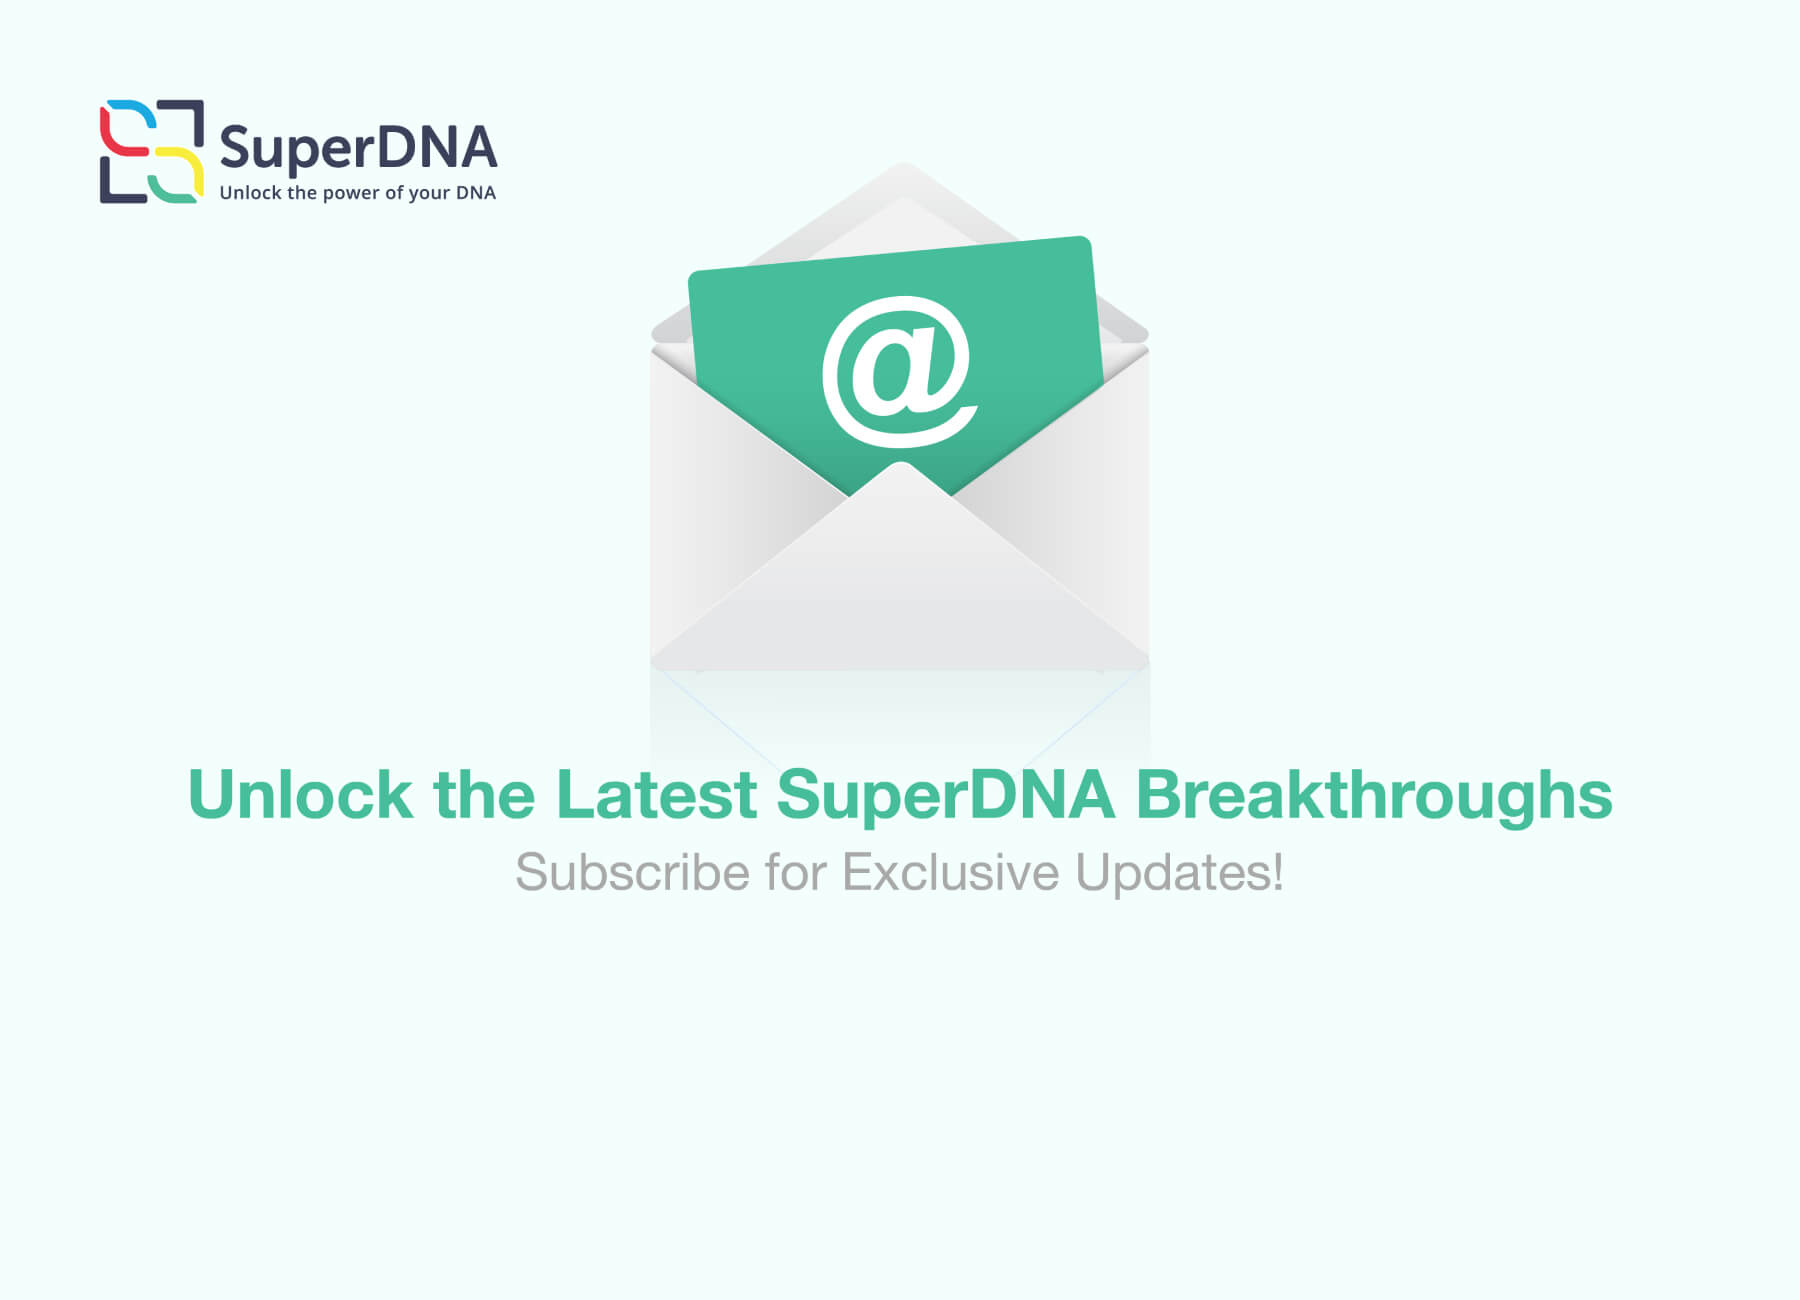 Unlock the Latest SuperDNA Breakthroughs - Subscribe for Exclusive Updates!